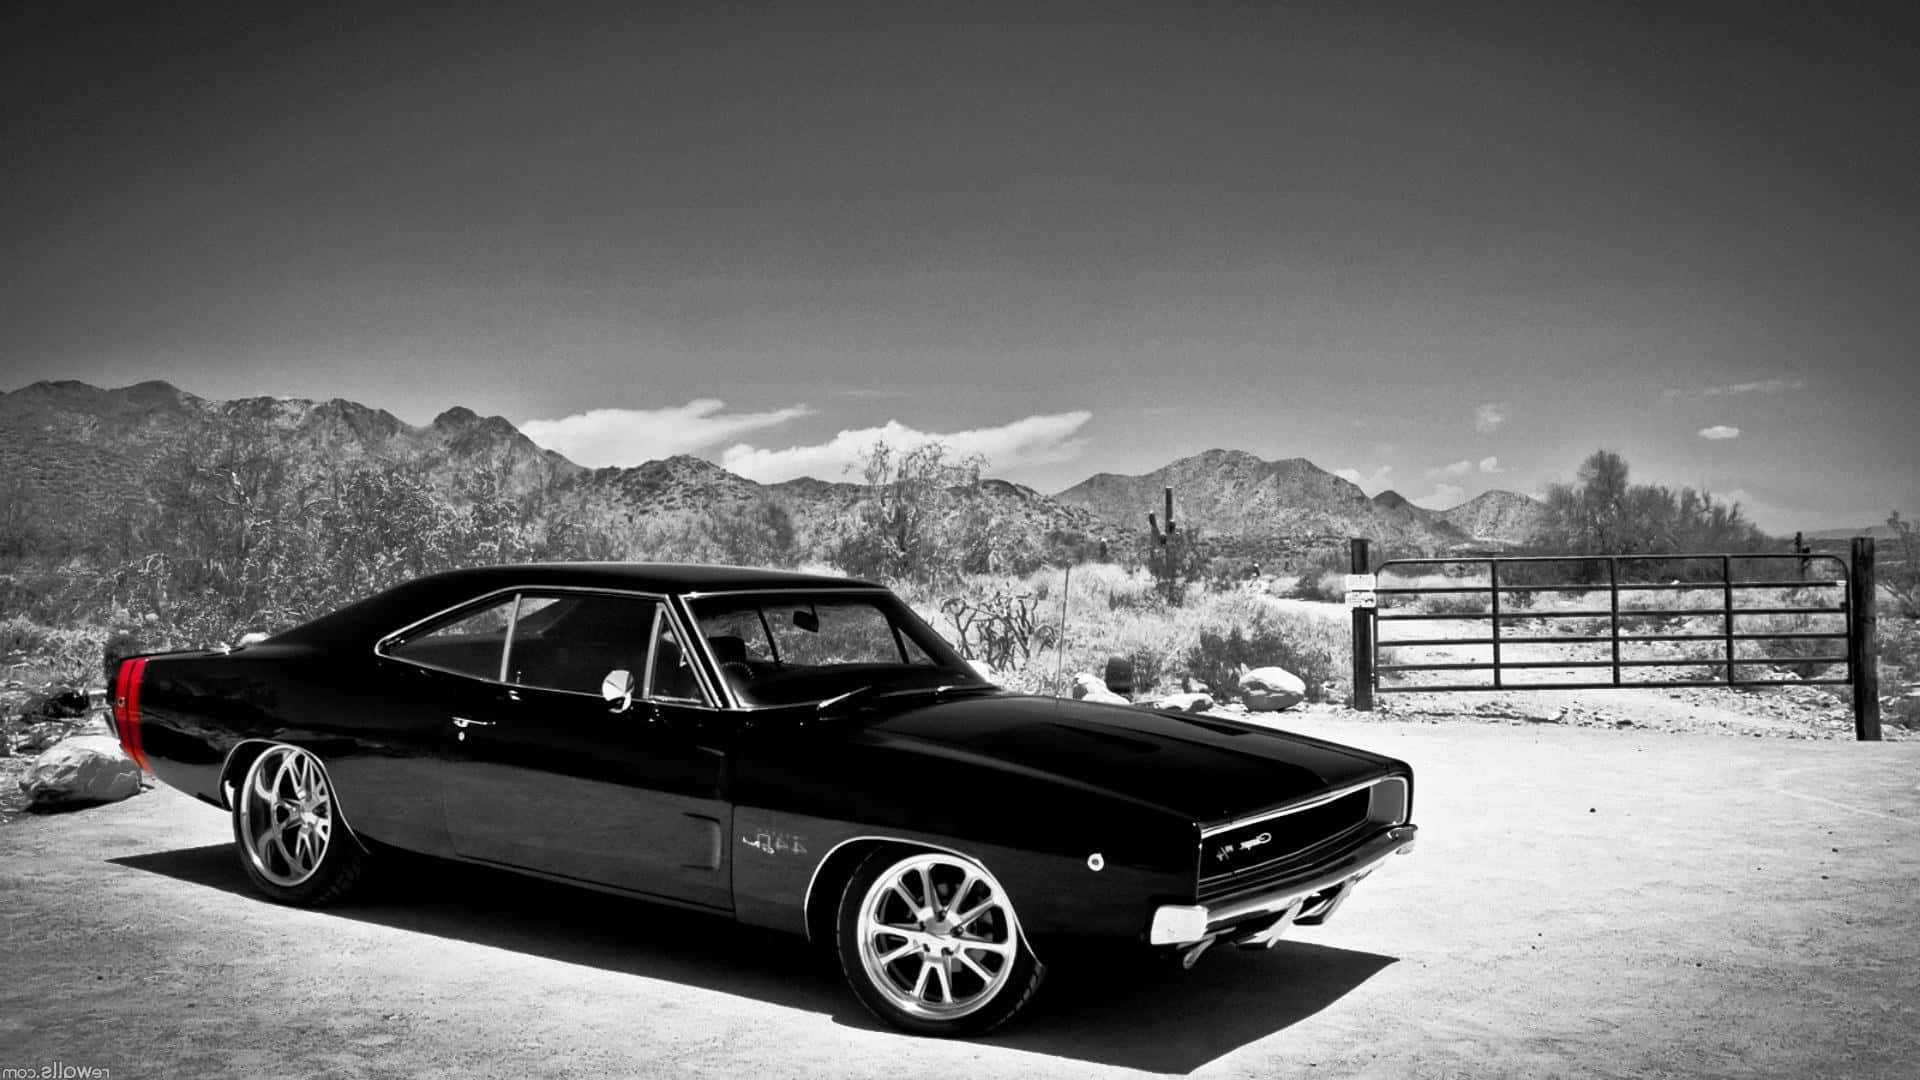 Breathtaking Dodge Charger on the Open Road Wallpaper